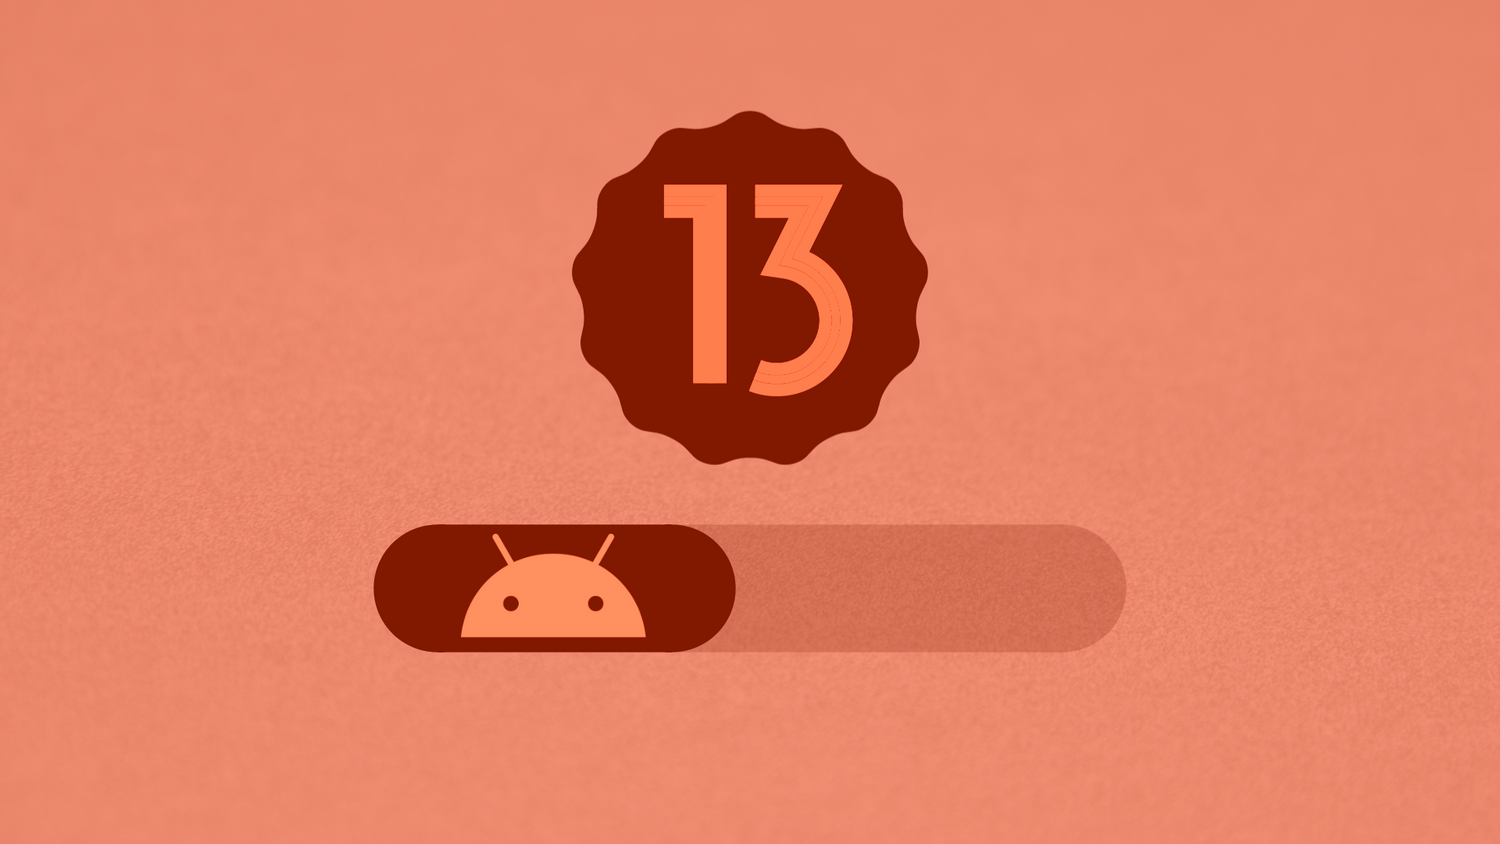 Android 13 DP2 adds smooth At-a-Glance transition animation